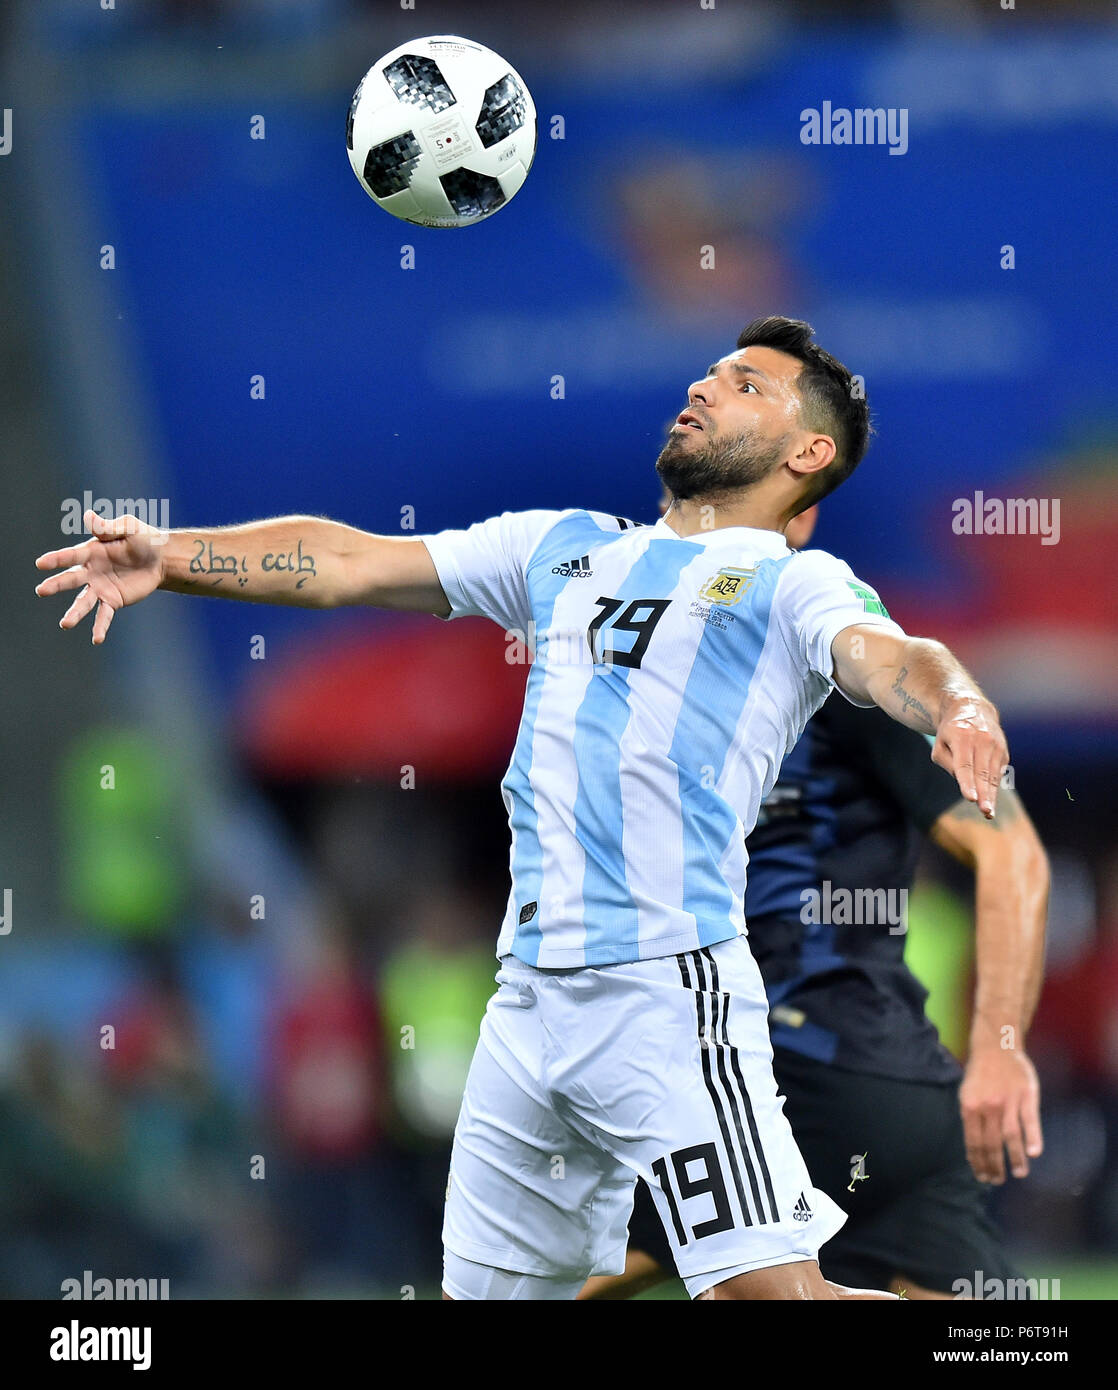 NIZHNIY NOVGOROD, RUSSIA - JUNE 21: Sergio Aguero of Argentina in action during the 2018 FIFA World Cup Russia group D match between Argentina and Croatia at Nizhniy Novgorod Stadium on June 21, 2018 in Nizhniy Novgorod, Russia. (Photo by Lukasz Laskowski/PressFocus/MB Media) Stock Photo